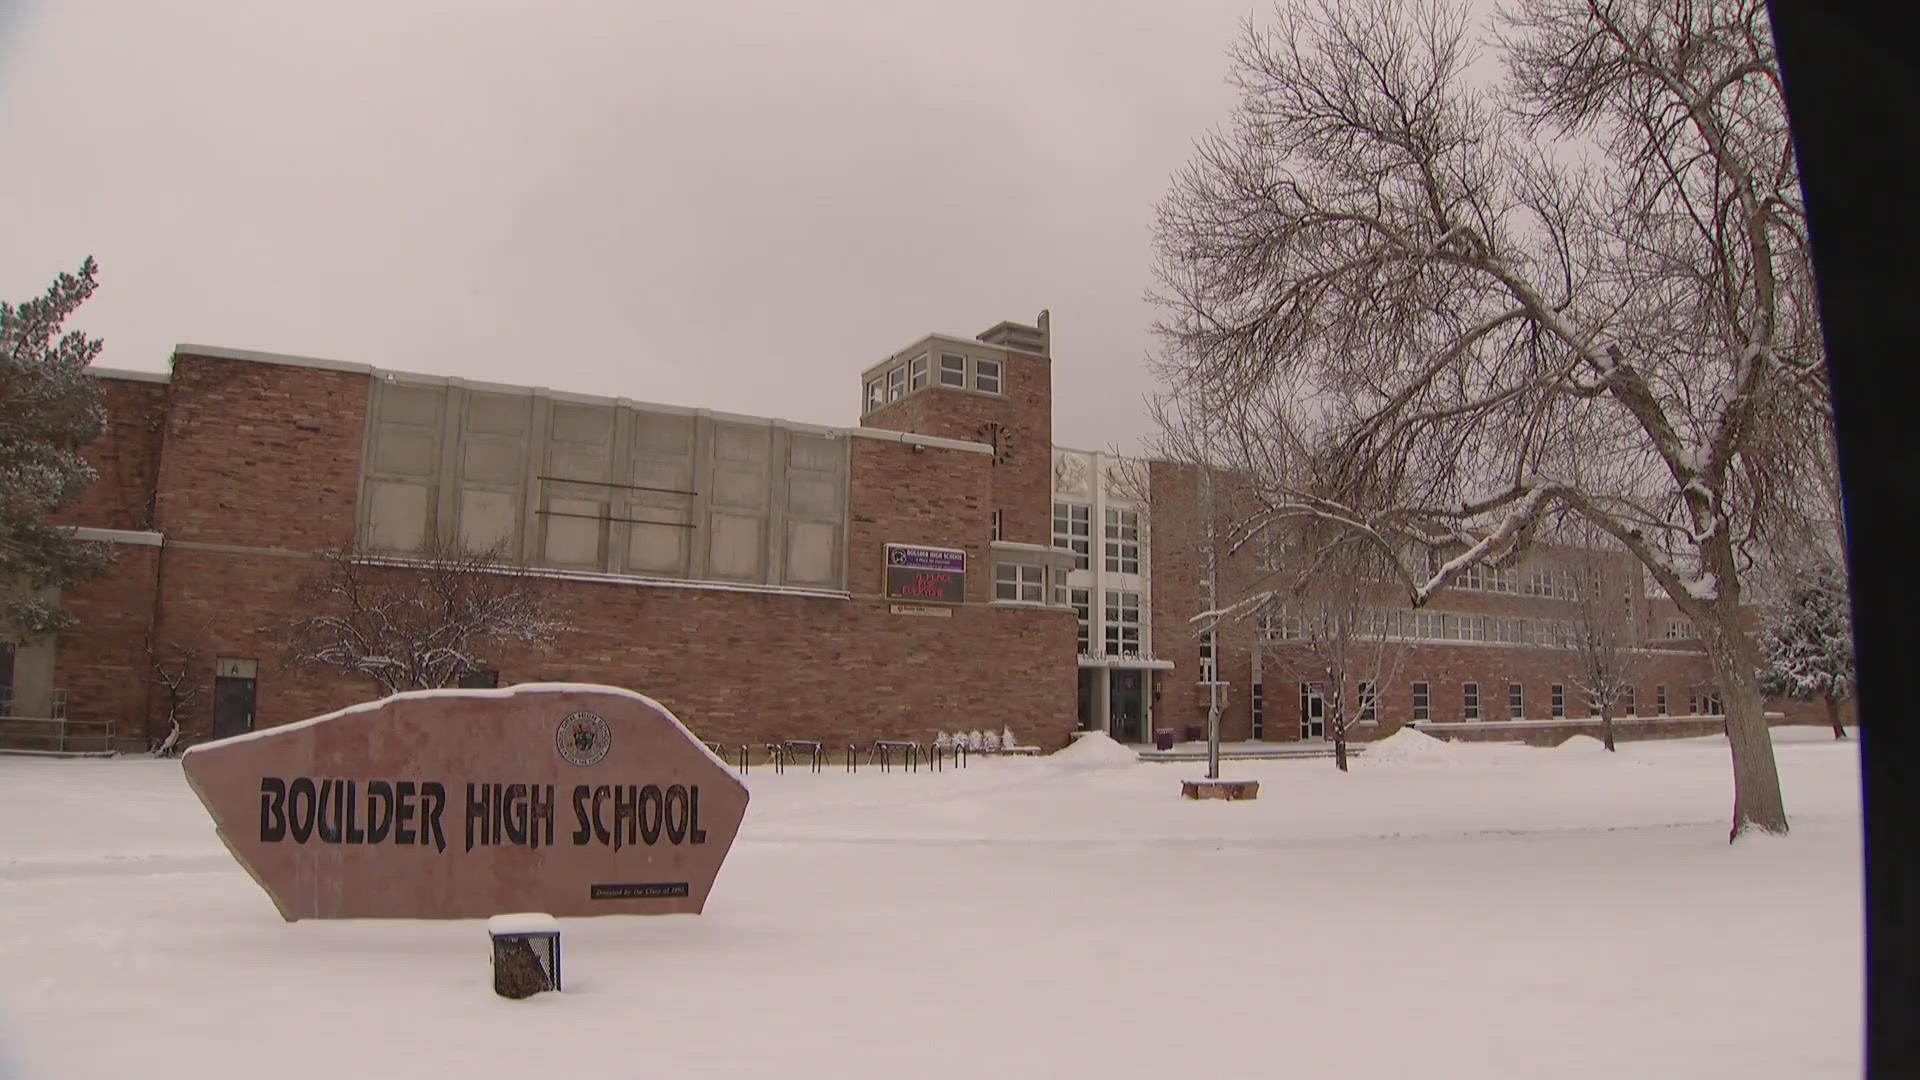 Law enforcement agencies responded to threats to schools across Colorado on Wednesday. The FBI said there's no indication of "a specific and credible threat."